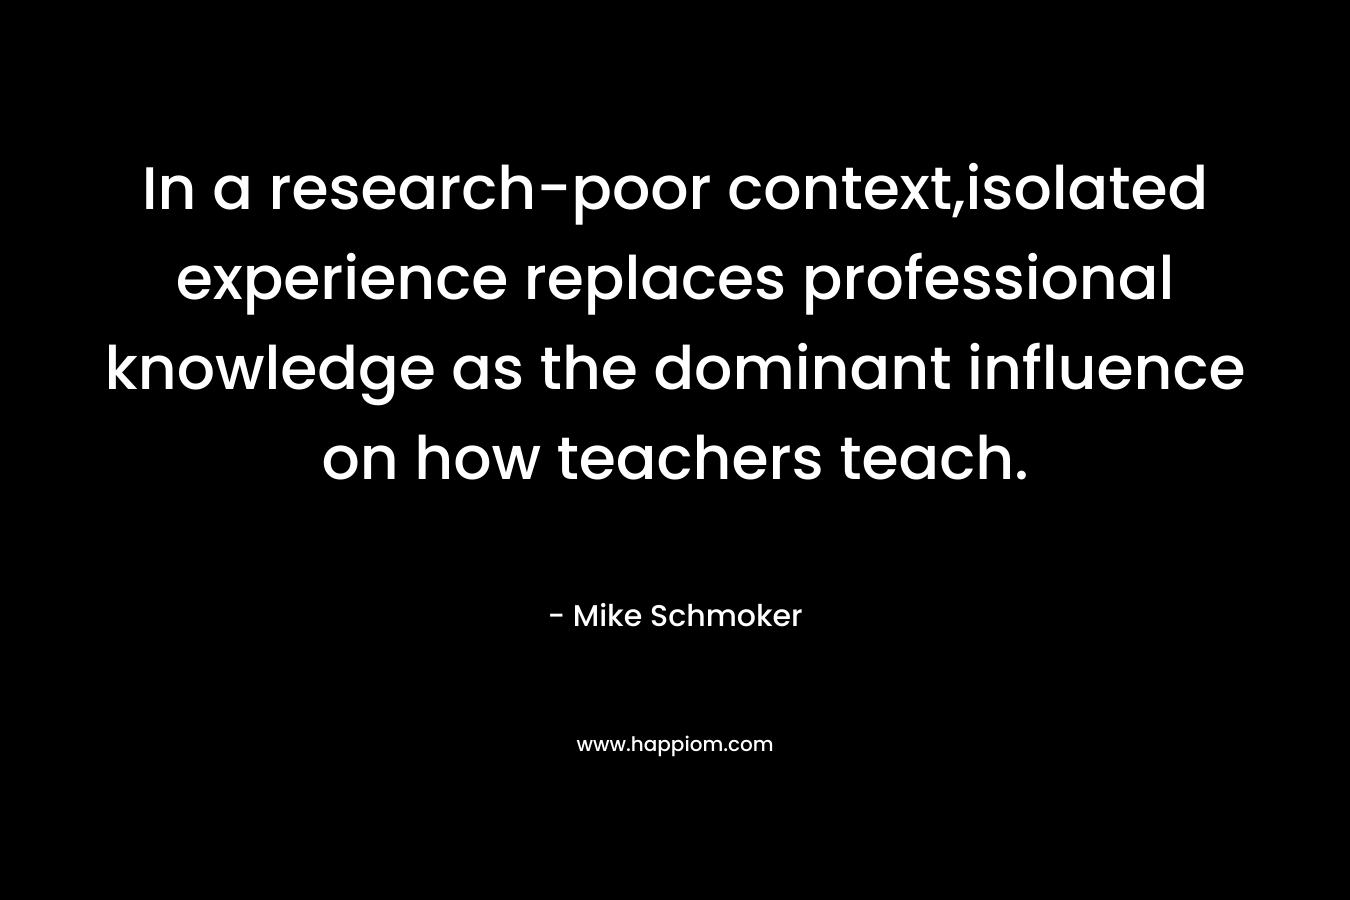 In a research-poor context,isolated experience replaces professional knowledge as the dominant influence on how teachers teach. – Mike Schmoker